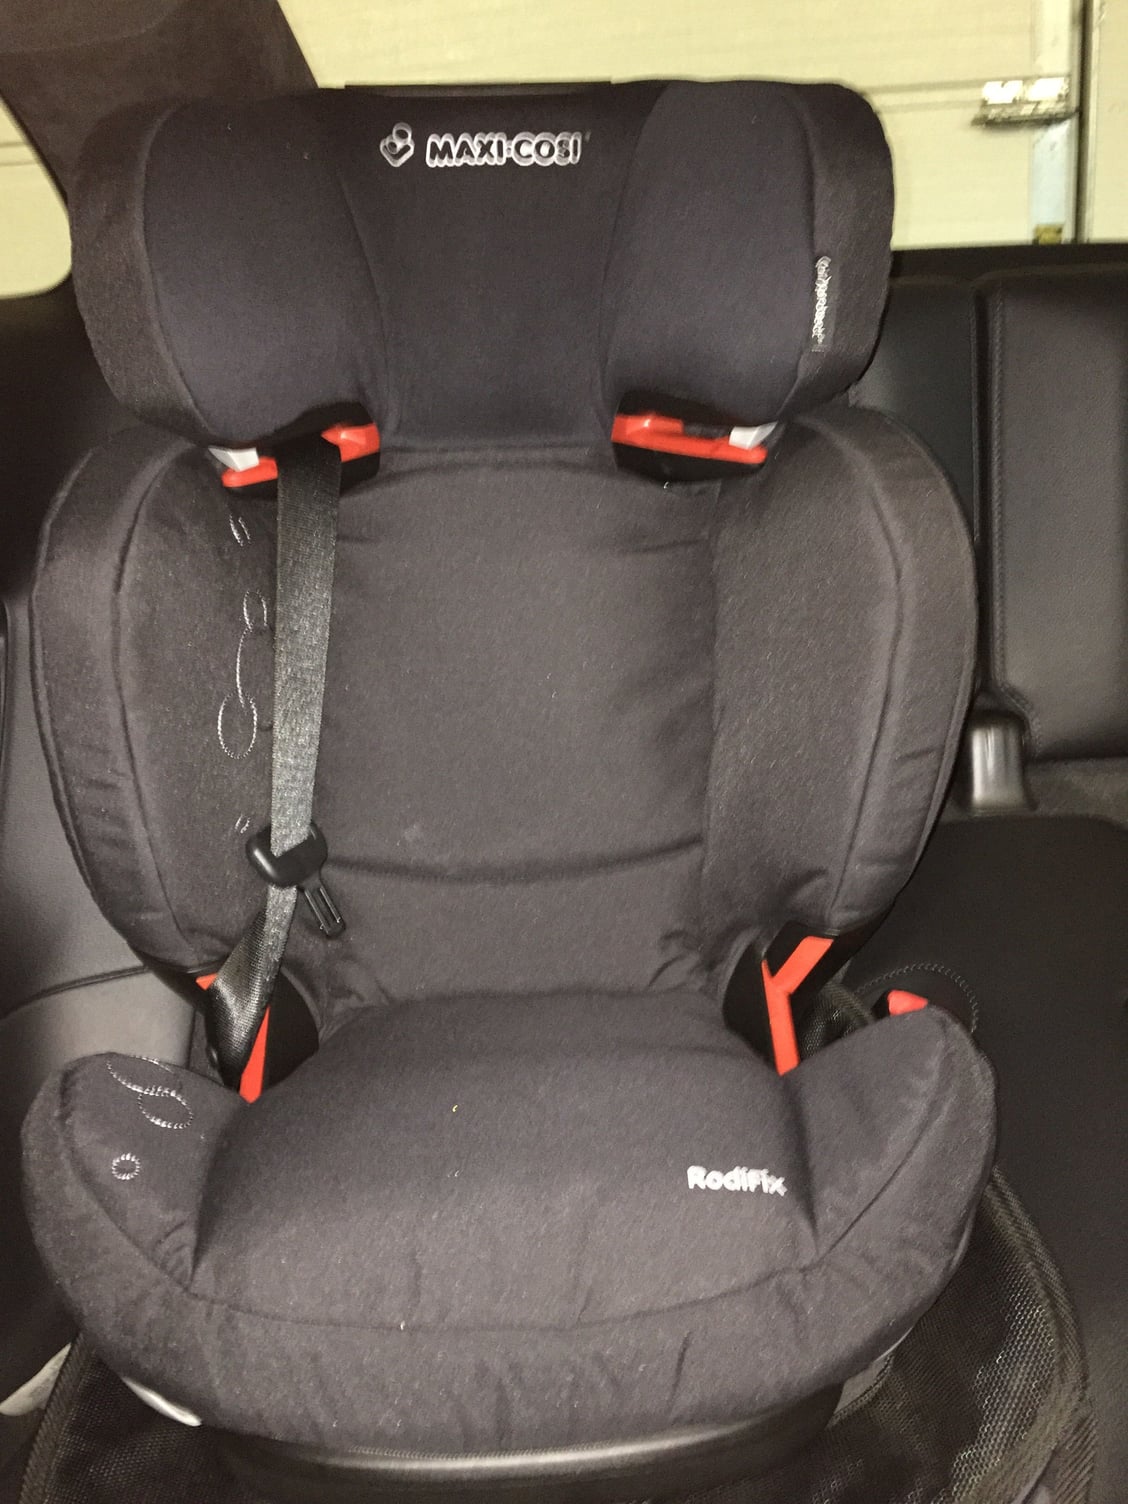 Child Carseat That Fits 991s Coupe Rear Seat - Page 3 - Rennlist ...